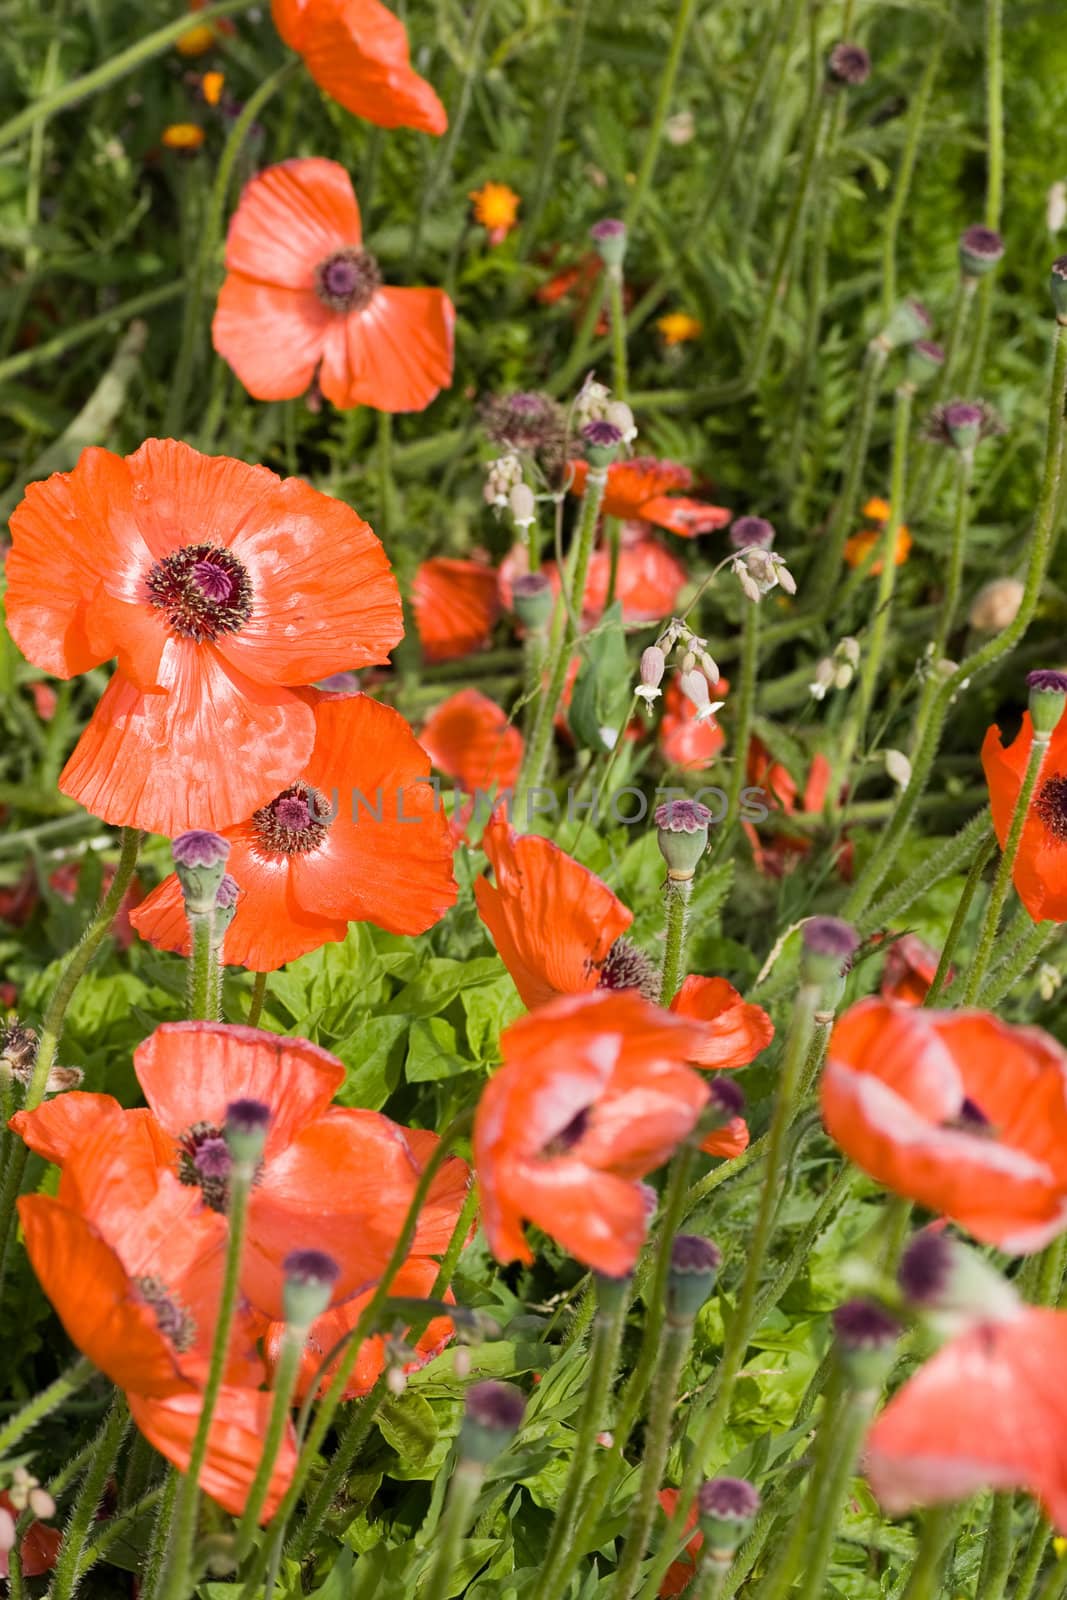 A patch of bright red poppies.